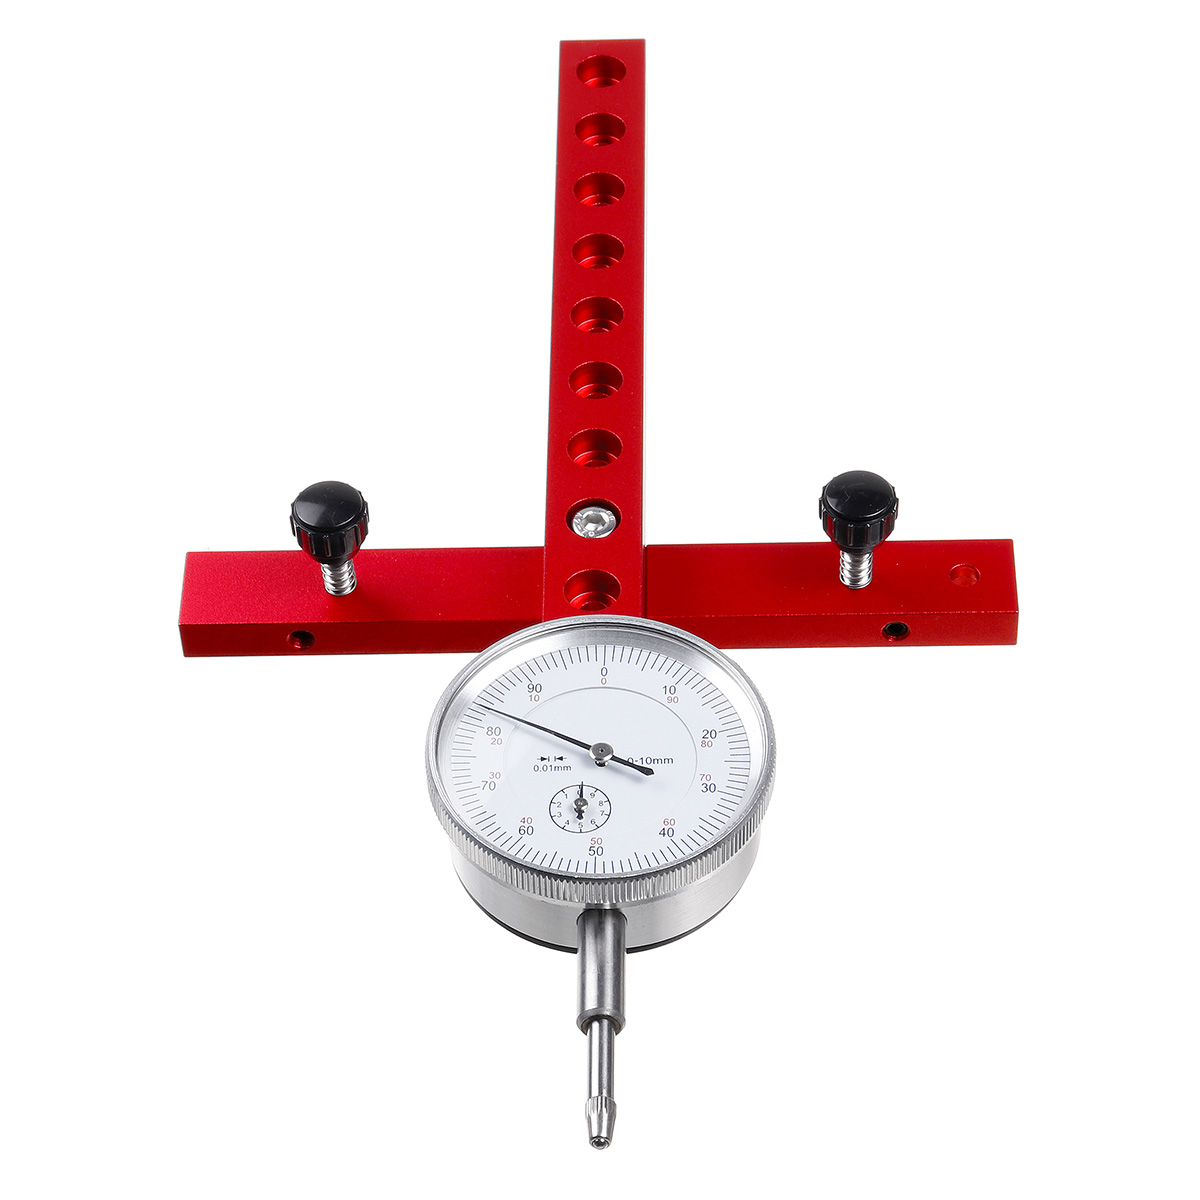 Aluminum-Alloy-Dial-indicator-Gauge-Table-Saws-Metric-or-Imperial-For-Aligning-and-Calibrating-Machi-1914181-5